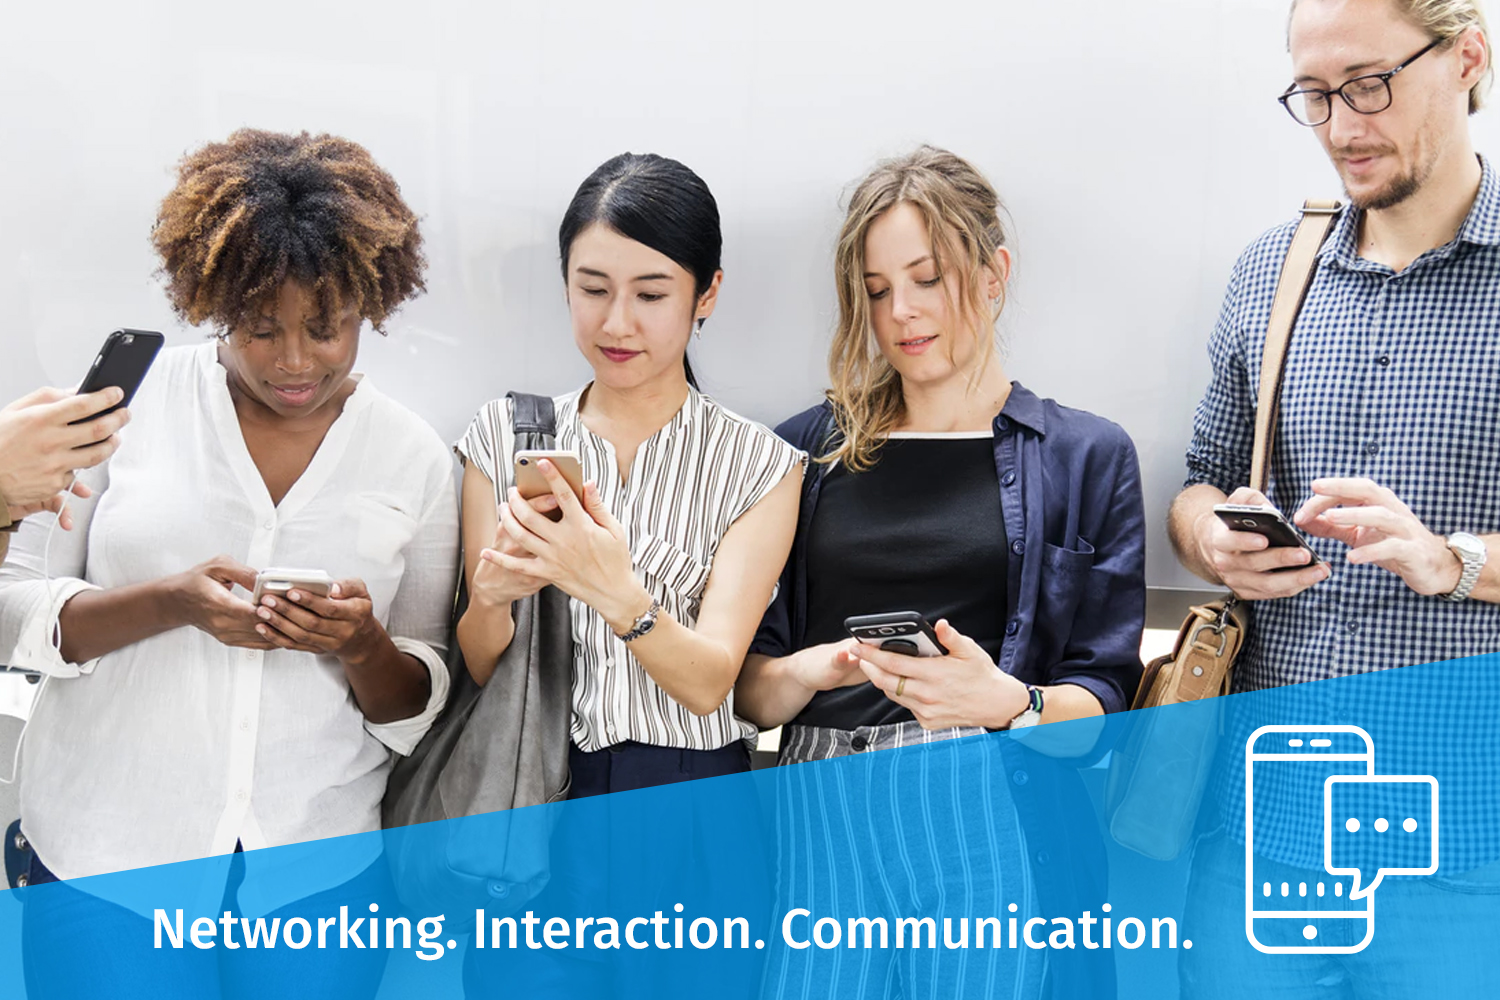 Networking. Interaction. Communication.